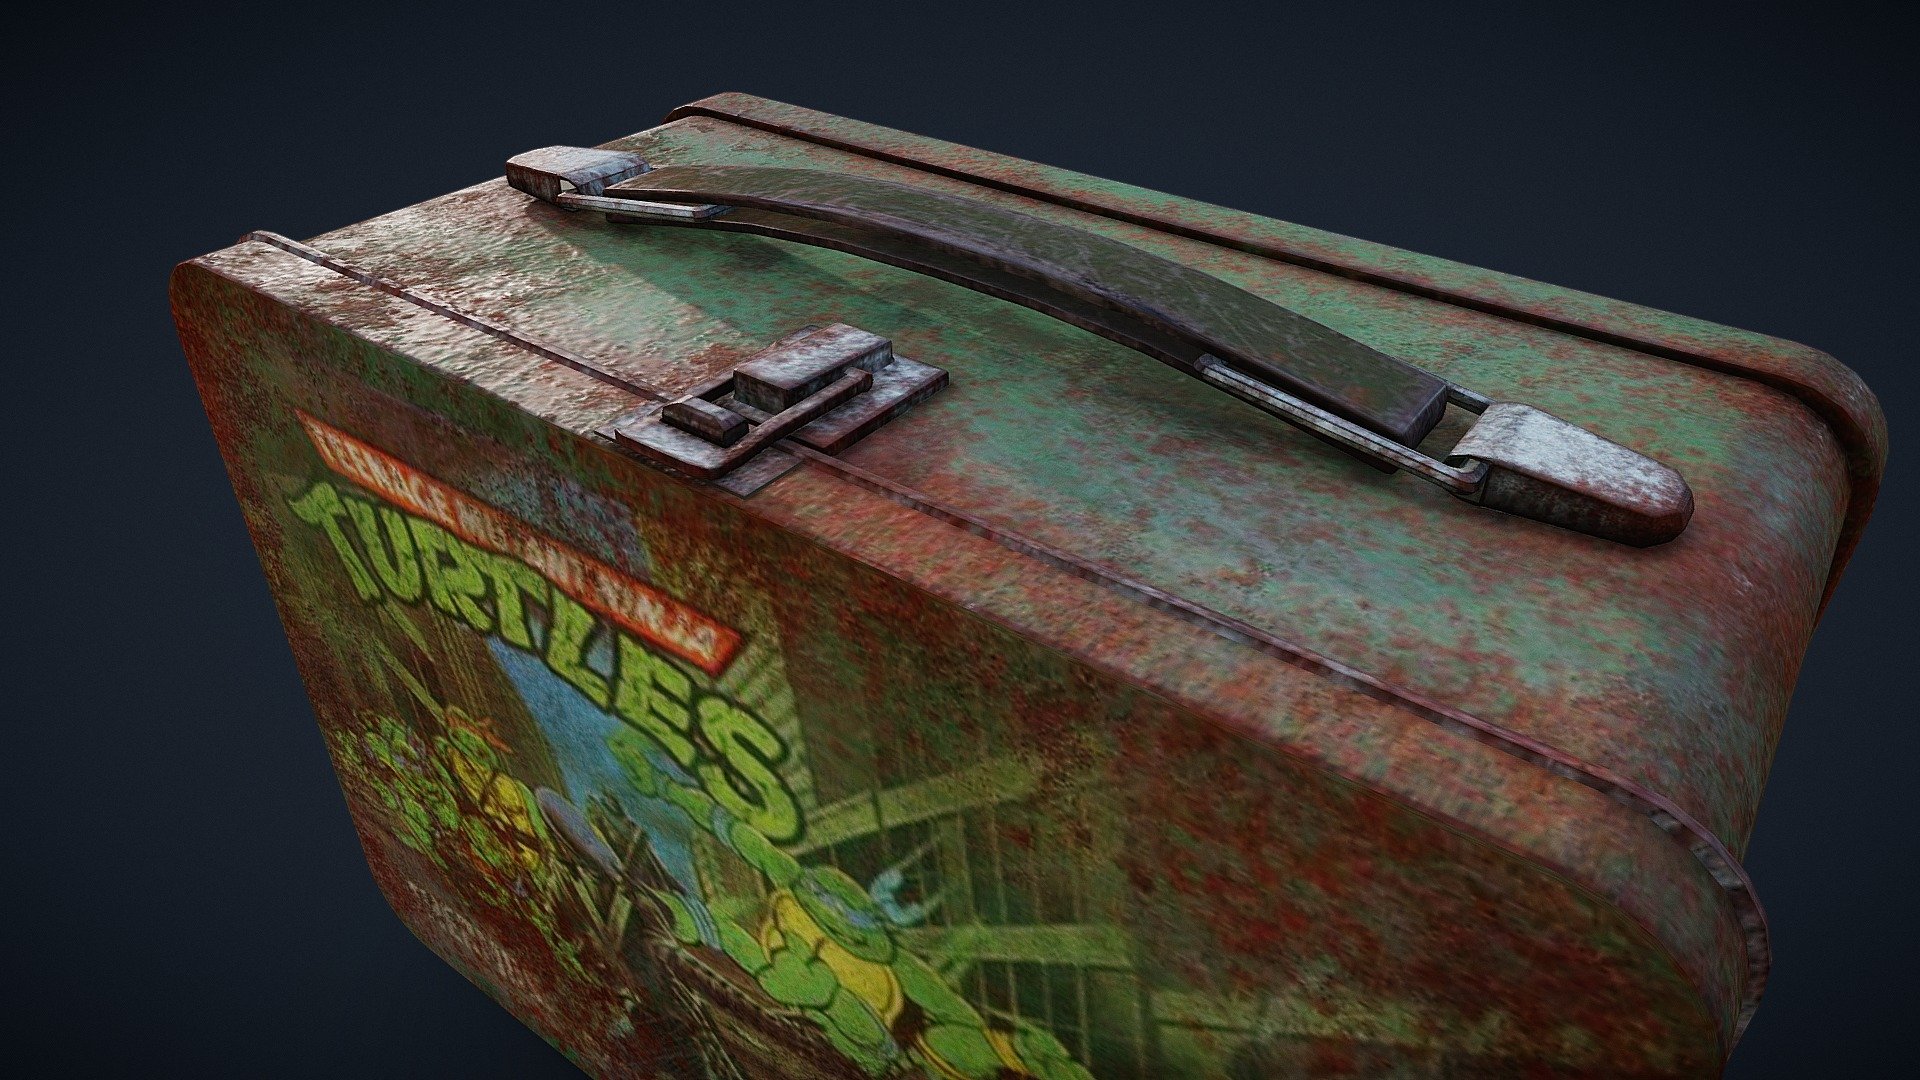 This is my first asset textured in Substance Painter 3d model